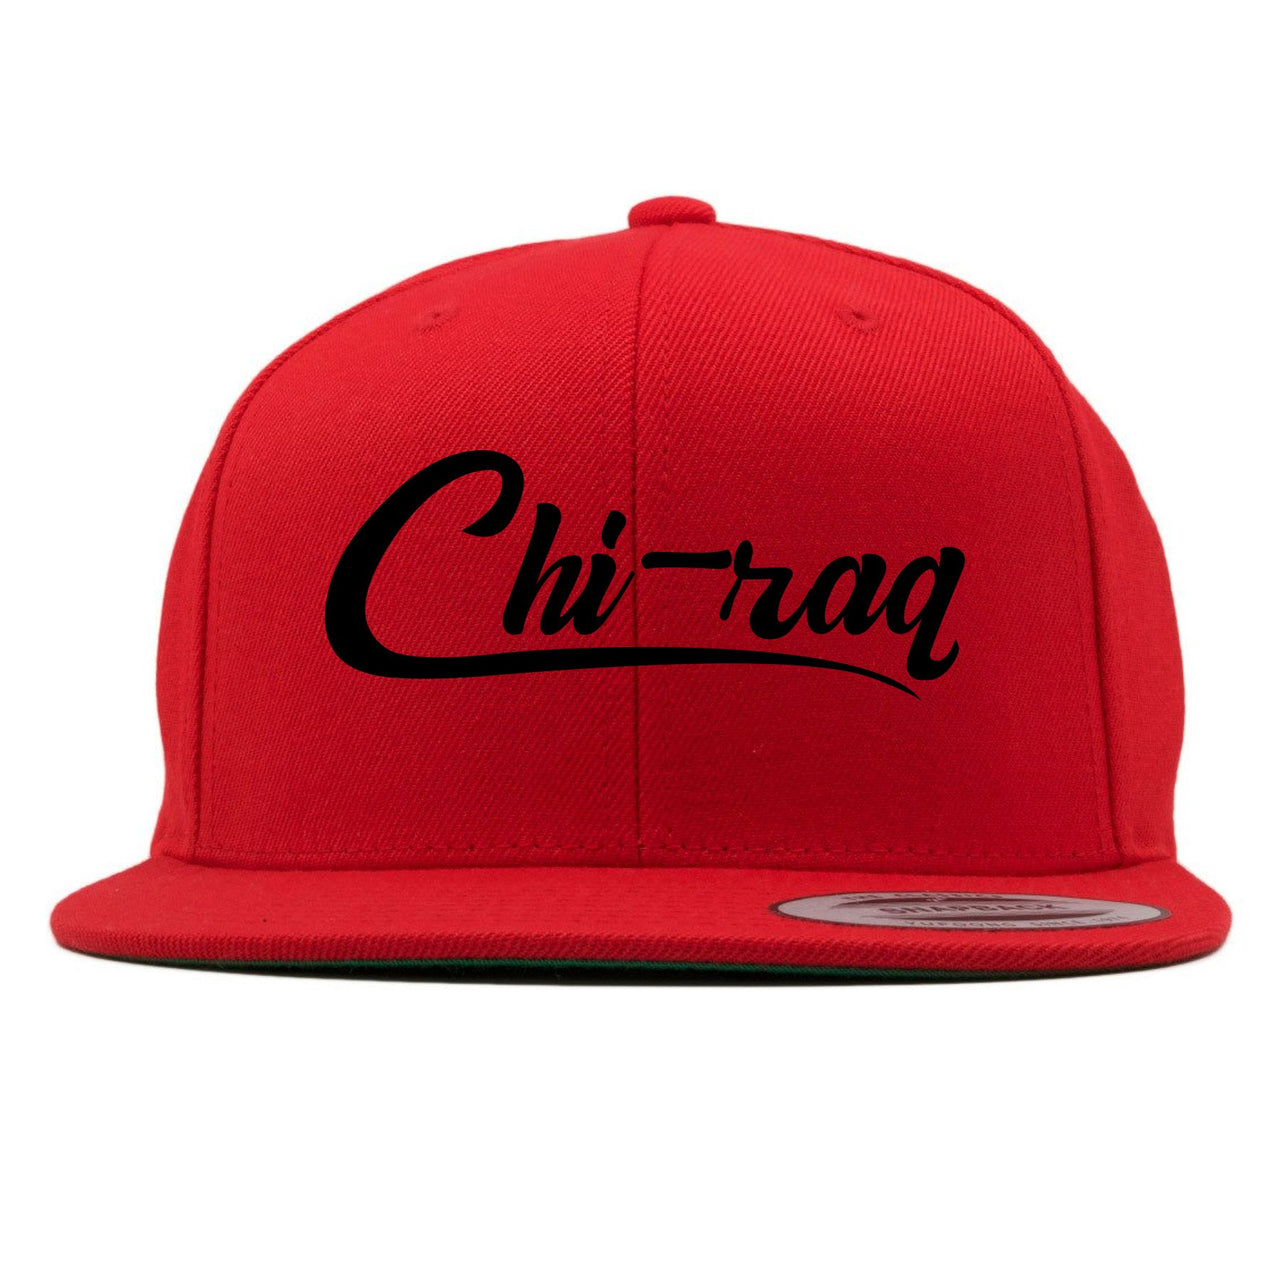 Reflections of a Champion 7s Snapback | Chiraq Script, Red